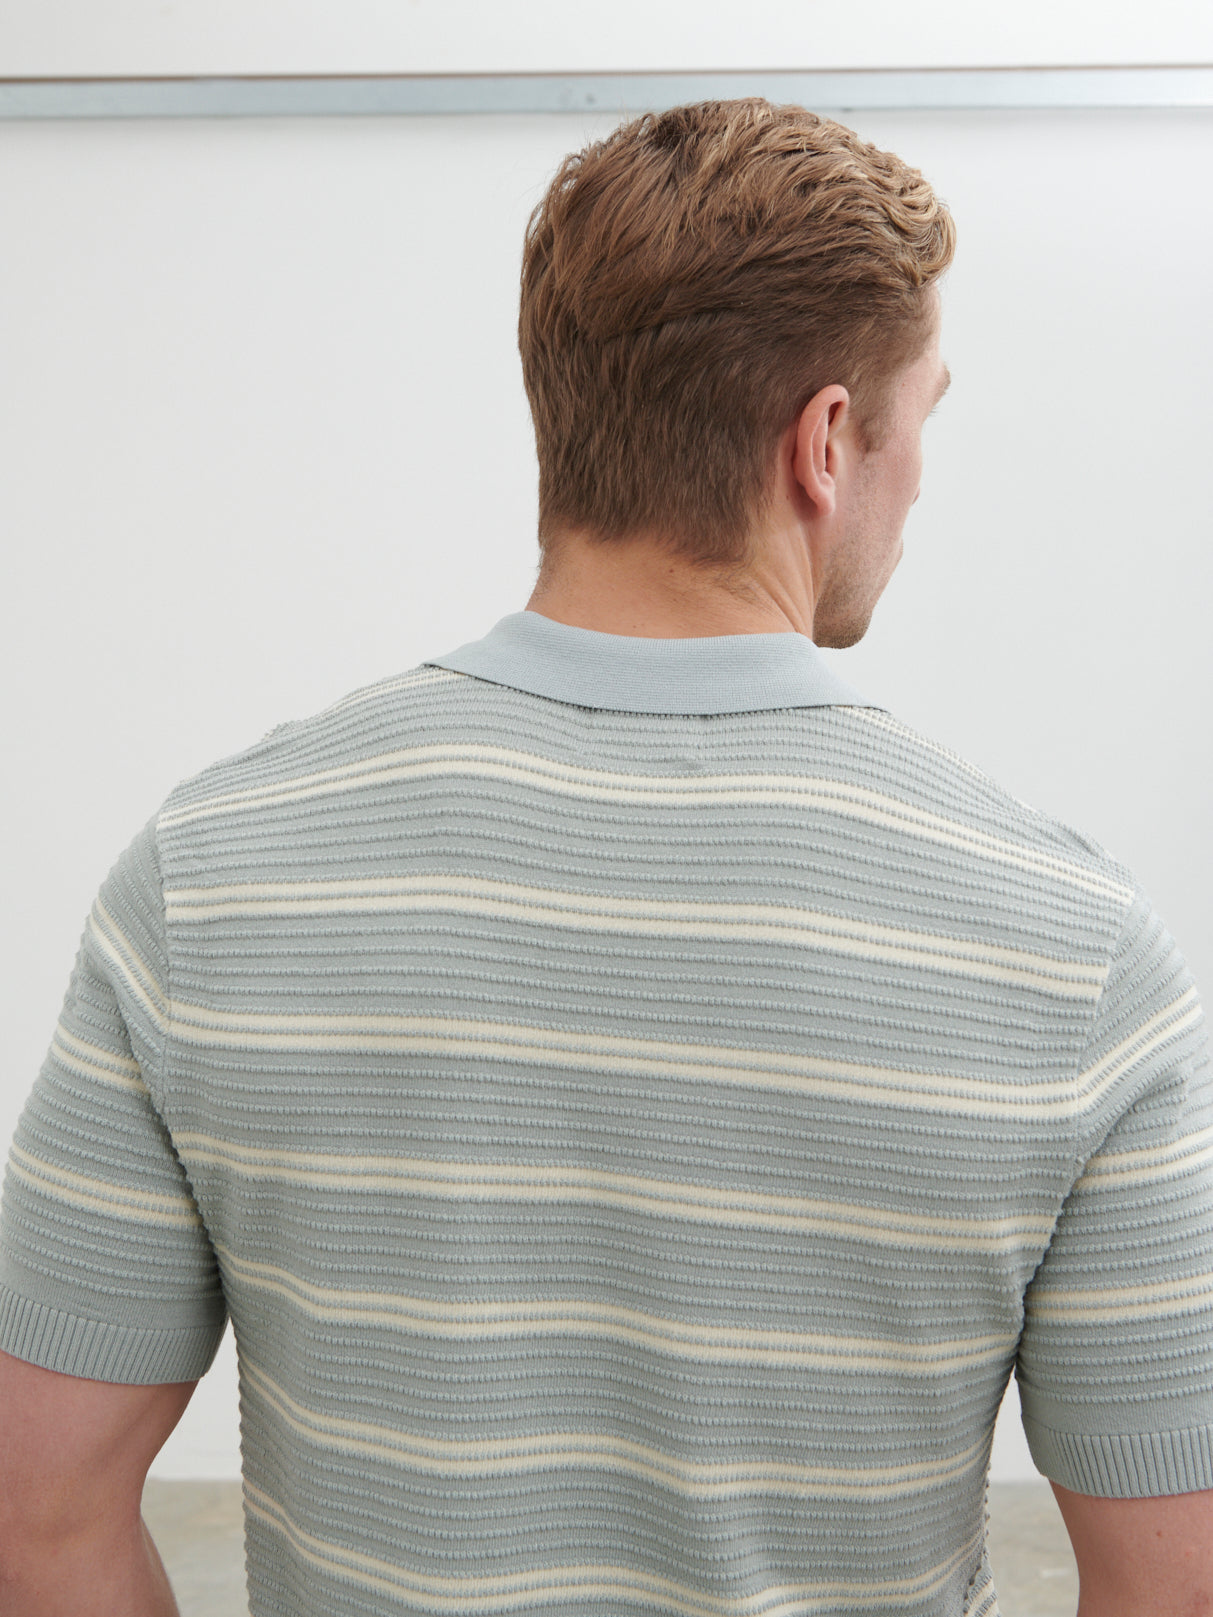 Channing Stripe Knit Polo - Grey Blue and Beige